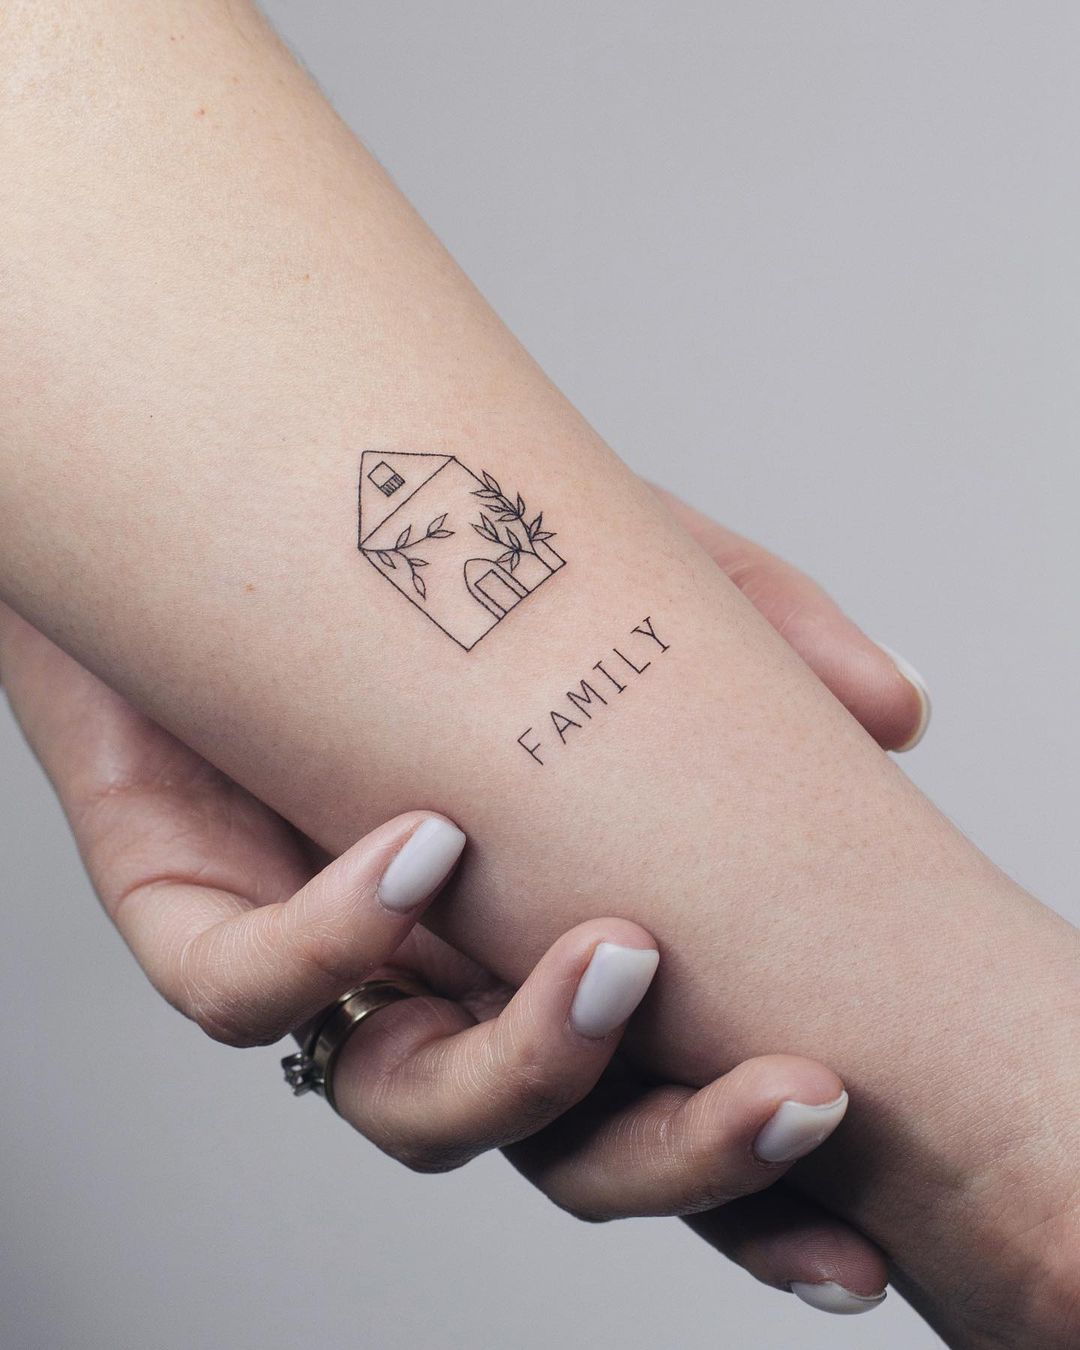 House with Word “Family” Tattoo on Arm